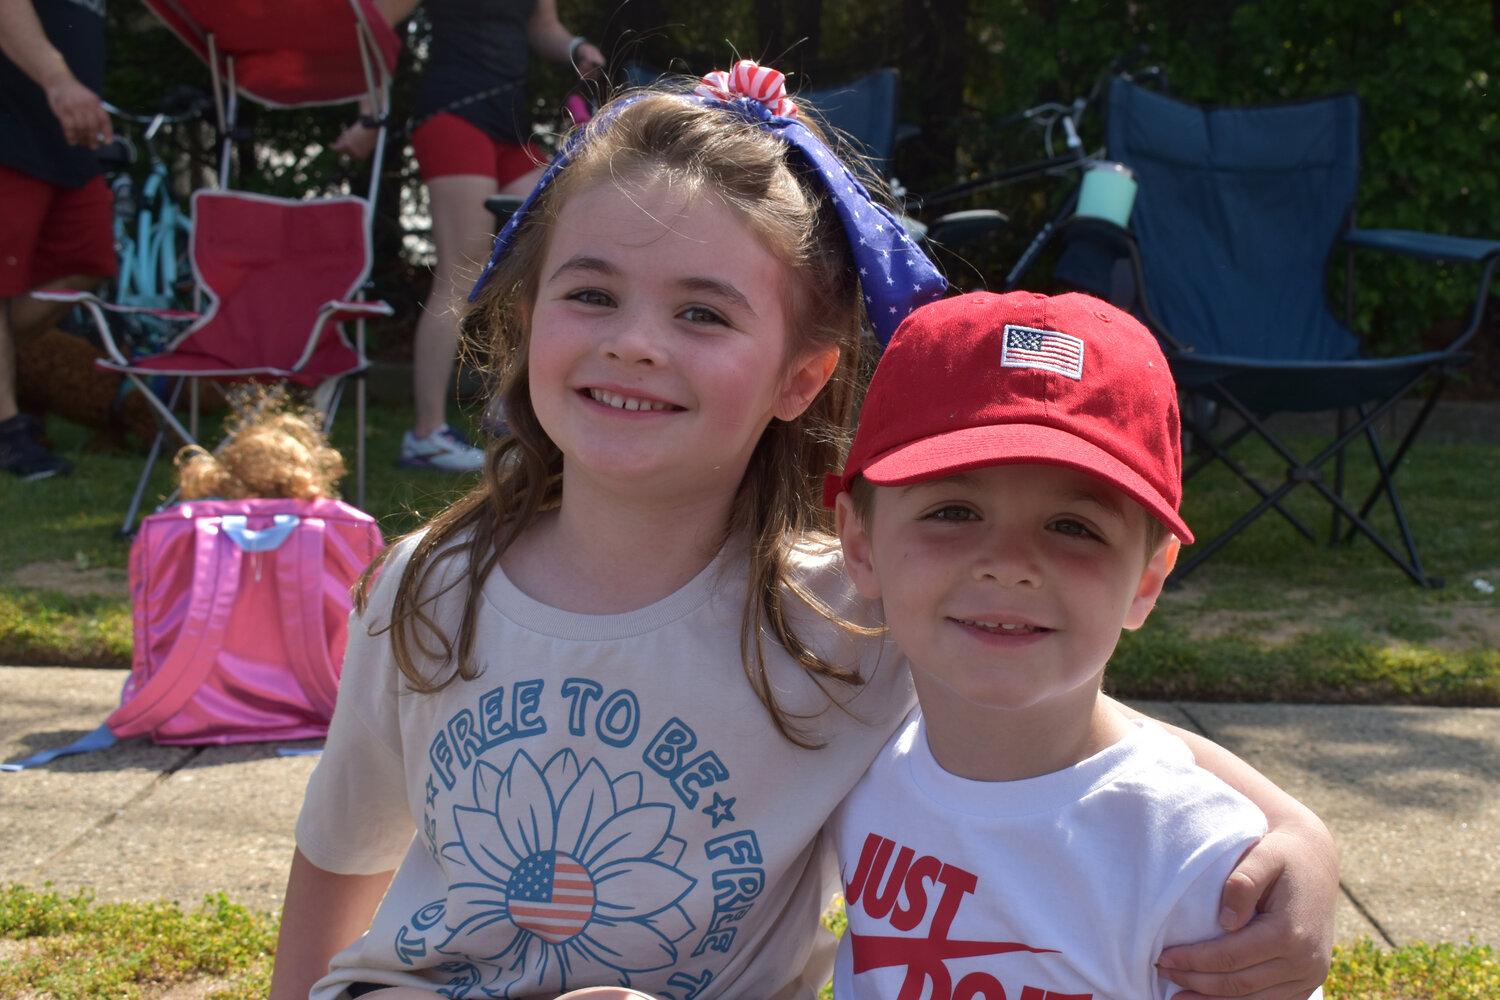 Lily and Rory Briody, ages 5 and 3 of Merrick, watched the parade and ceremony in their best red, white and blue spirit wear.